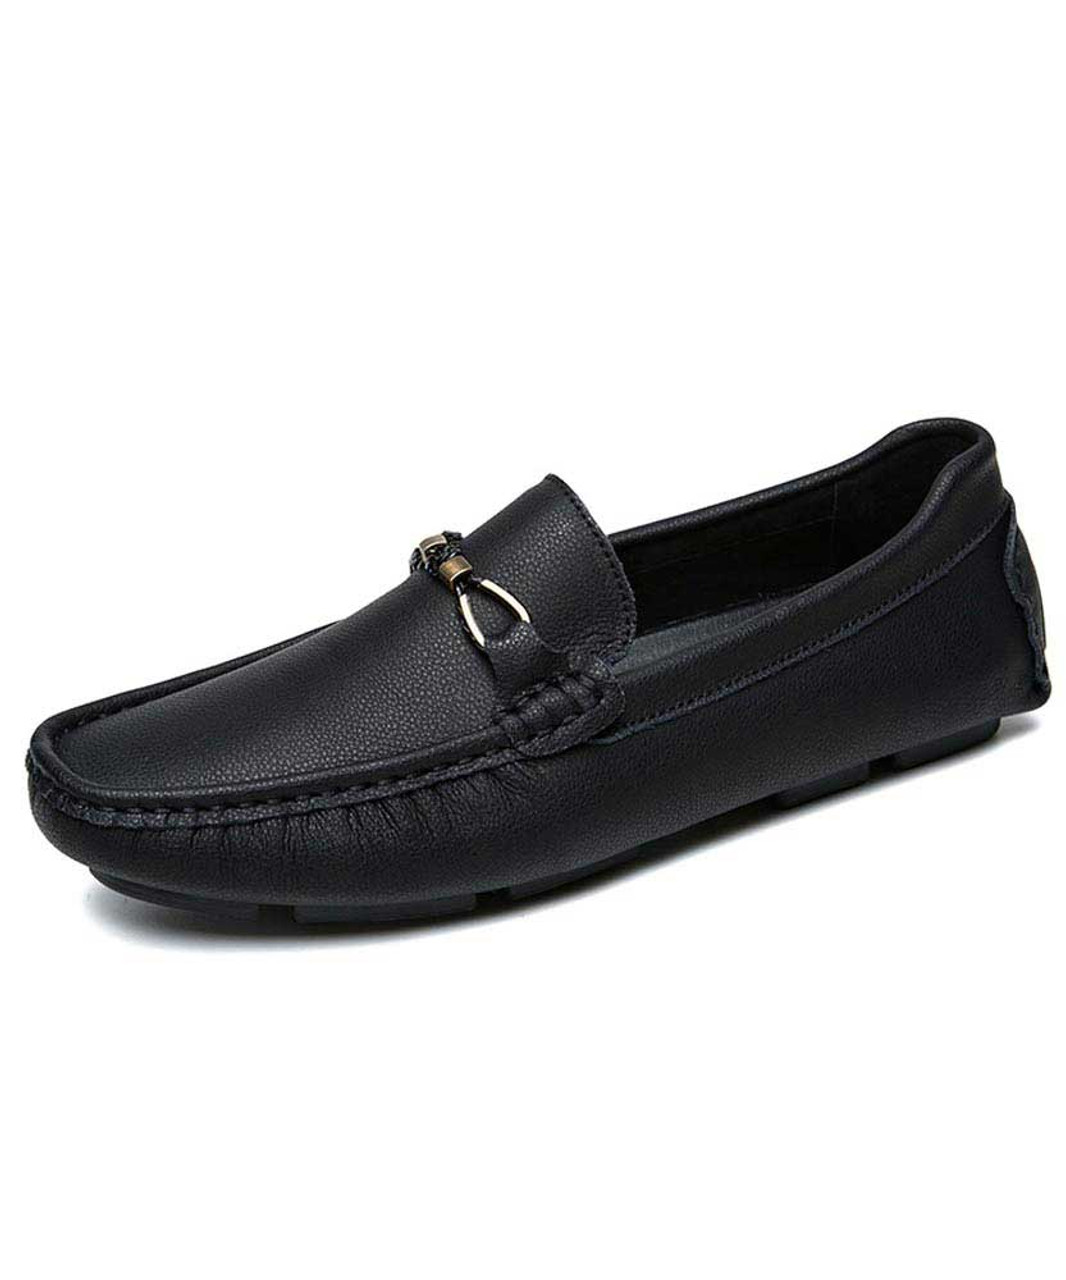 mens dress loafer shoes dress slip on shoes with buckle